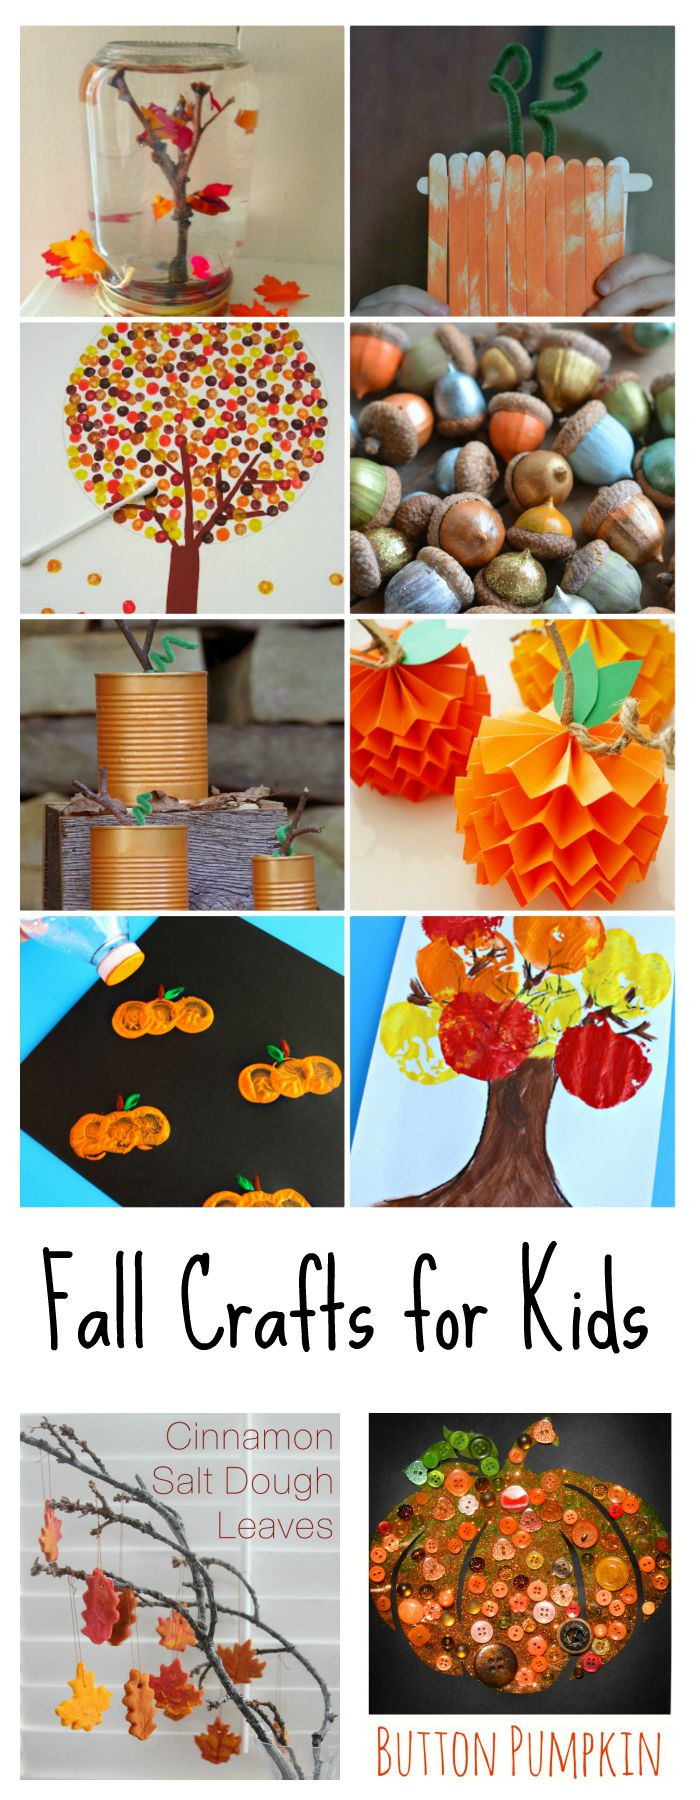 Fall Craft Idea For Kids
 Fall Crafts for Kids The Idea Room